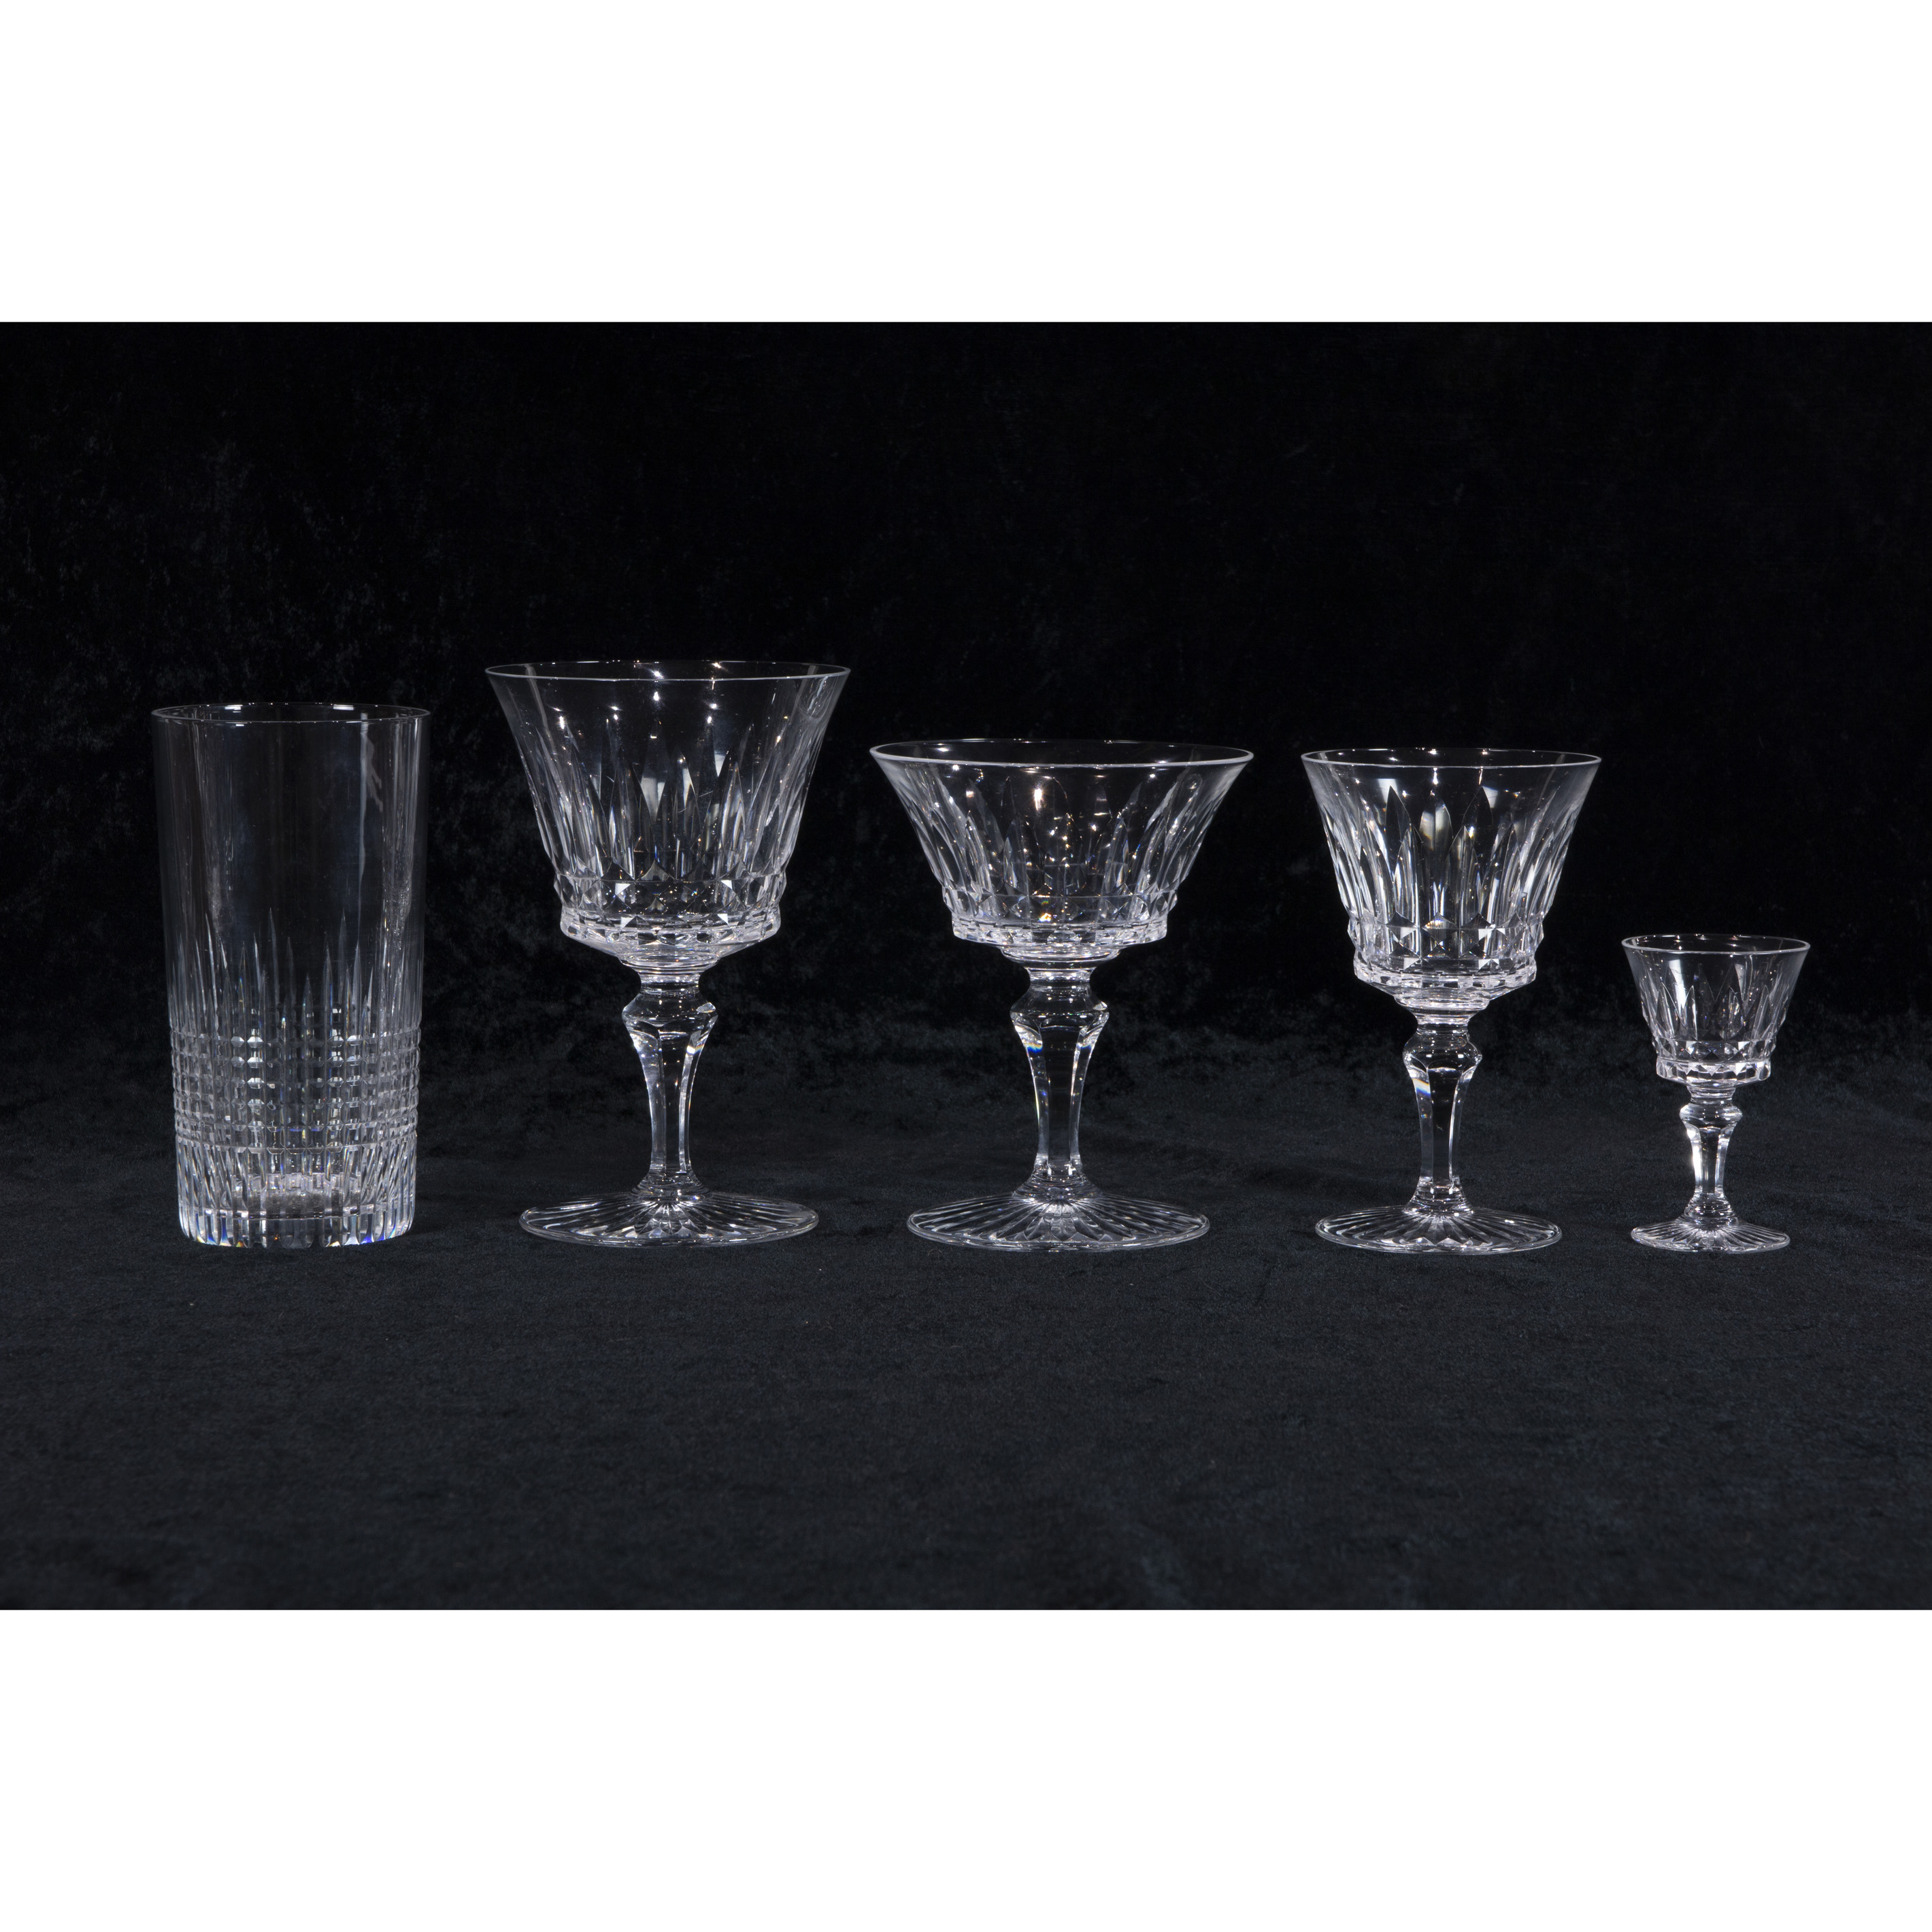 COLLECTION OF BACCARAT STEMWARE 3a46b6